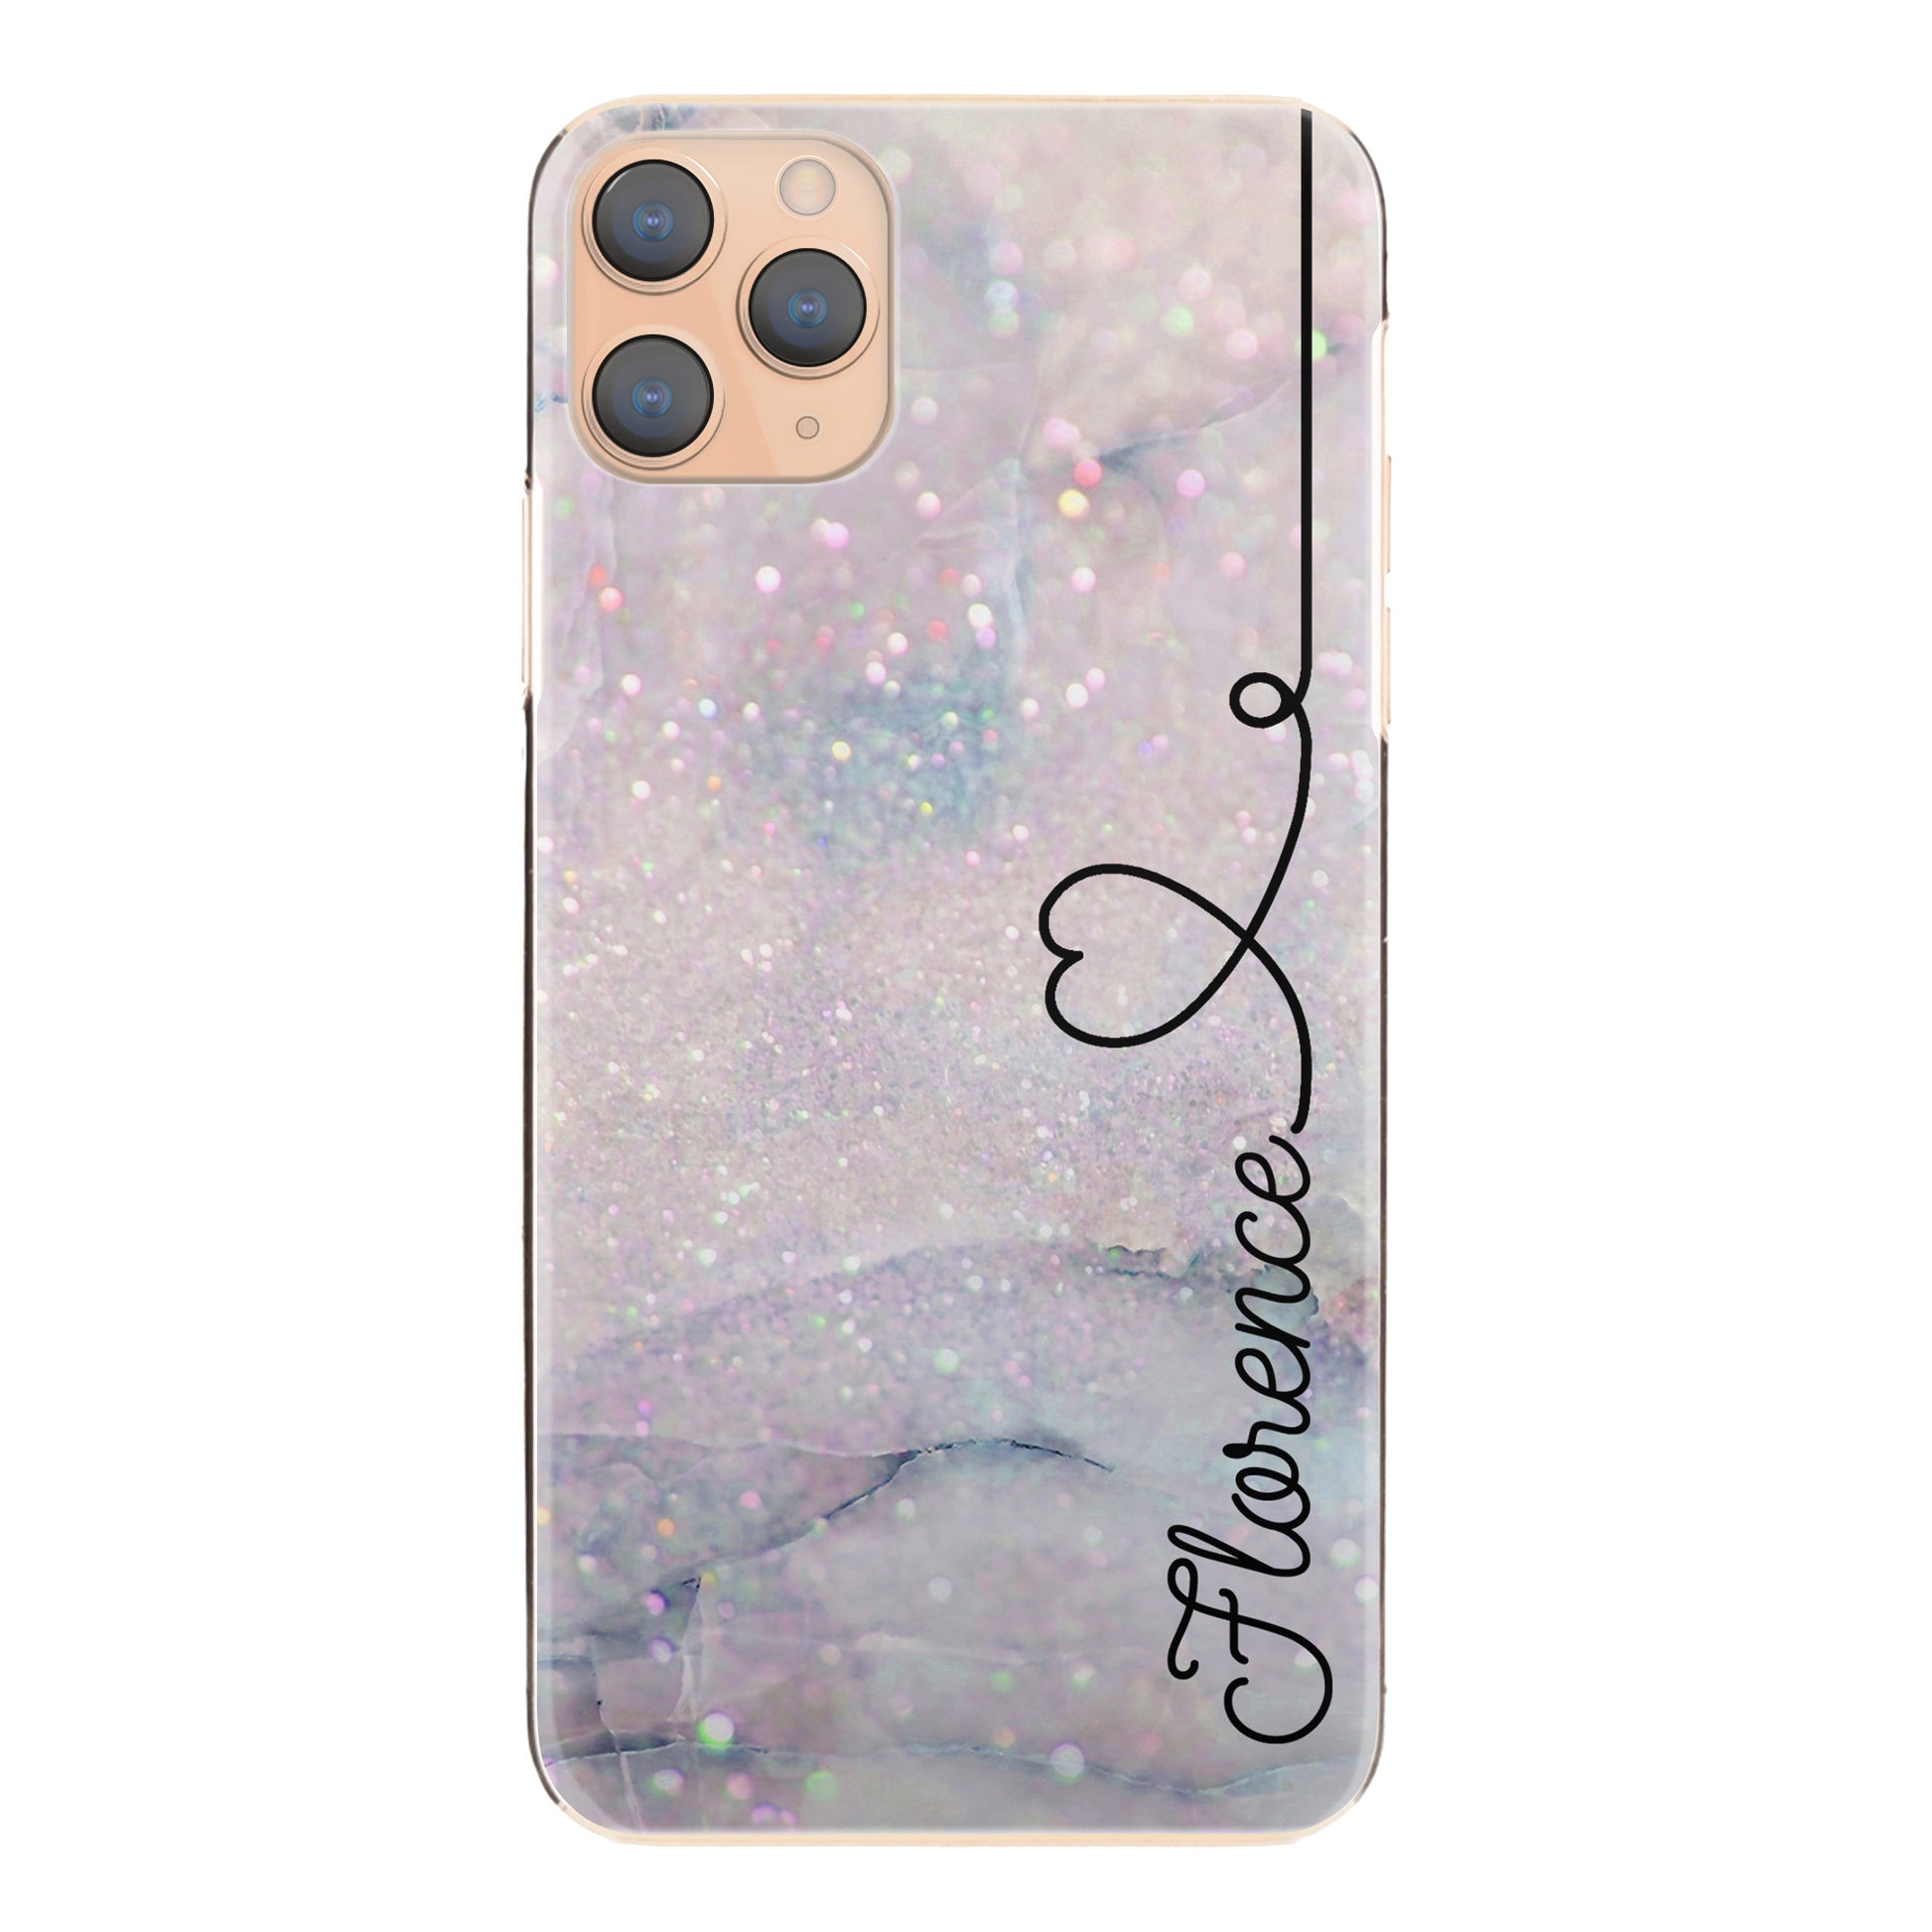 Personalised Motorola Phone Hard Case with Stylish Text and Heart Line on Textured Glitter Effect